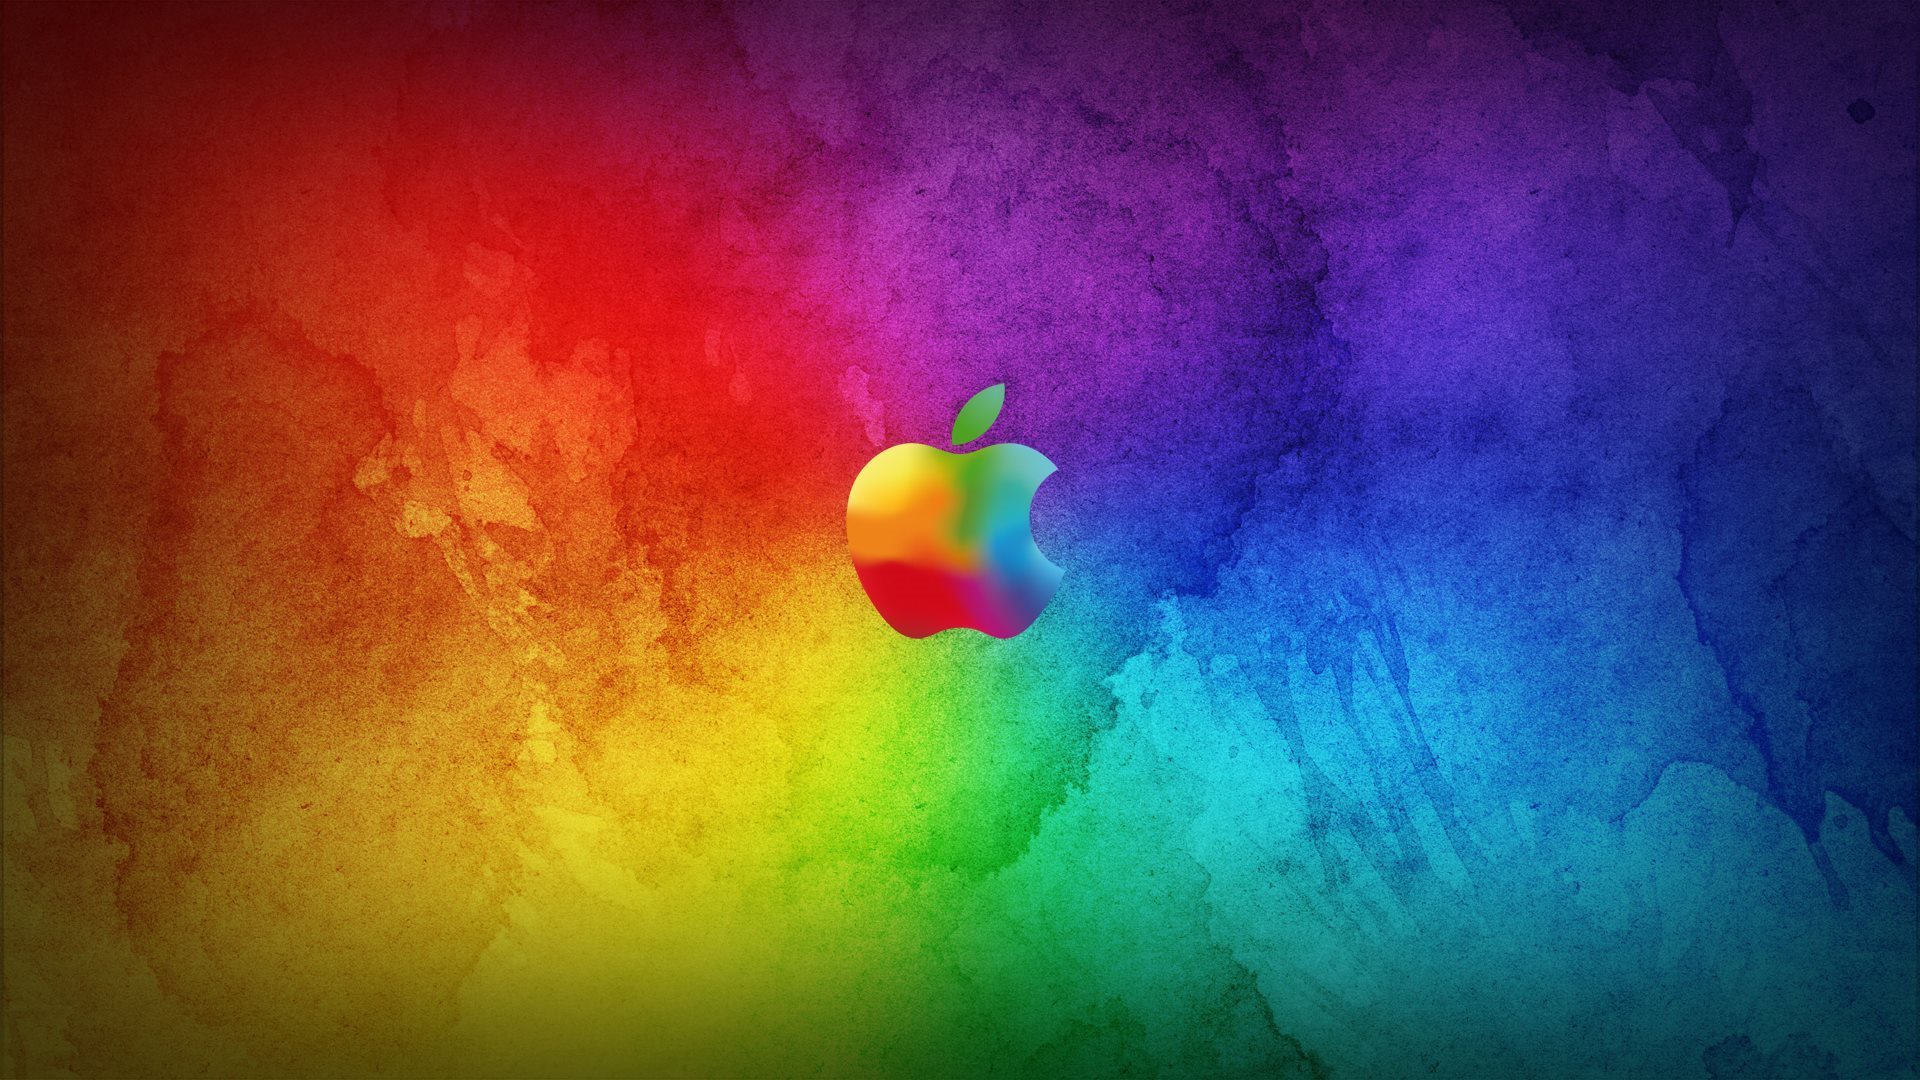 Download Amazing Colorful Apple Logo Wallpaper Full HD Wallpapers